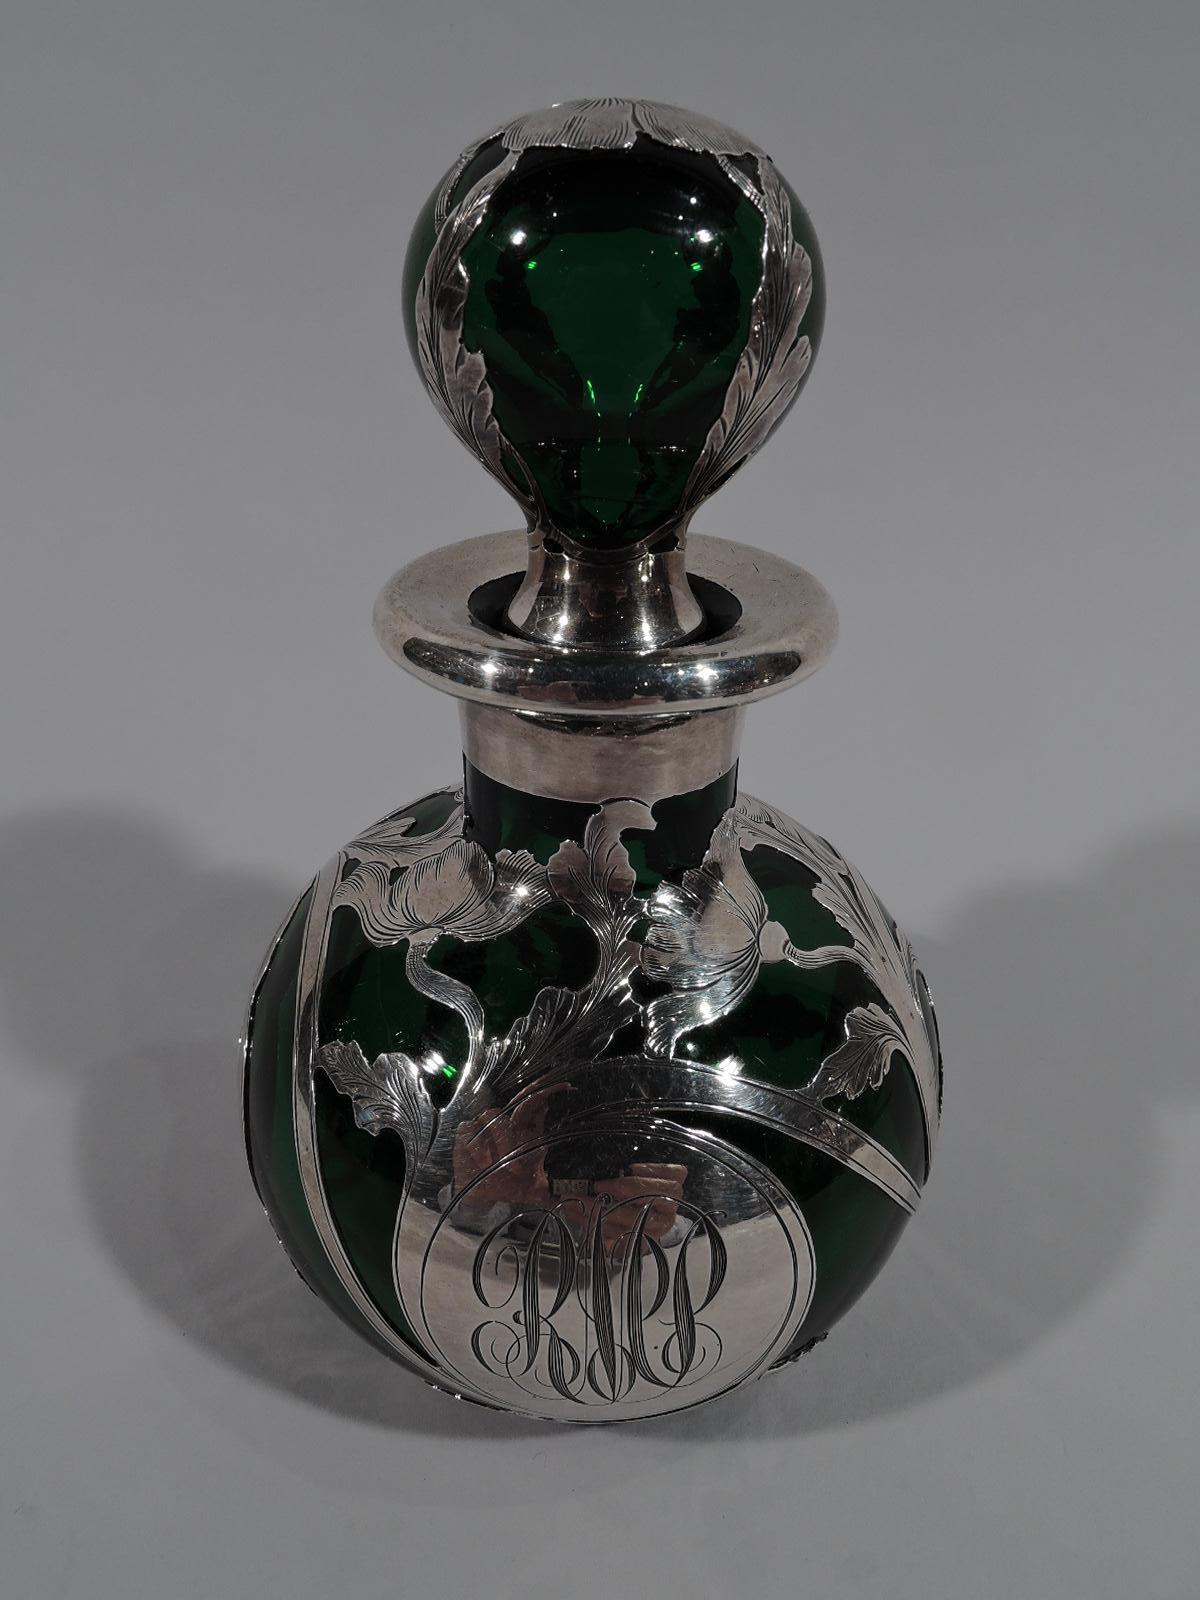 Turn-of-the-century Art Nouveau Classical glass perfume with engraved silver overlay. Globular bottle with short neck and everted rim. Ball stopper. Overlay rinceaux pattern with leafing and flowering scrolls. Round cartouche engraved with